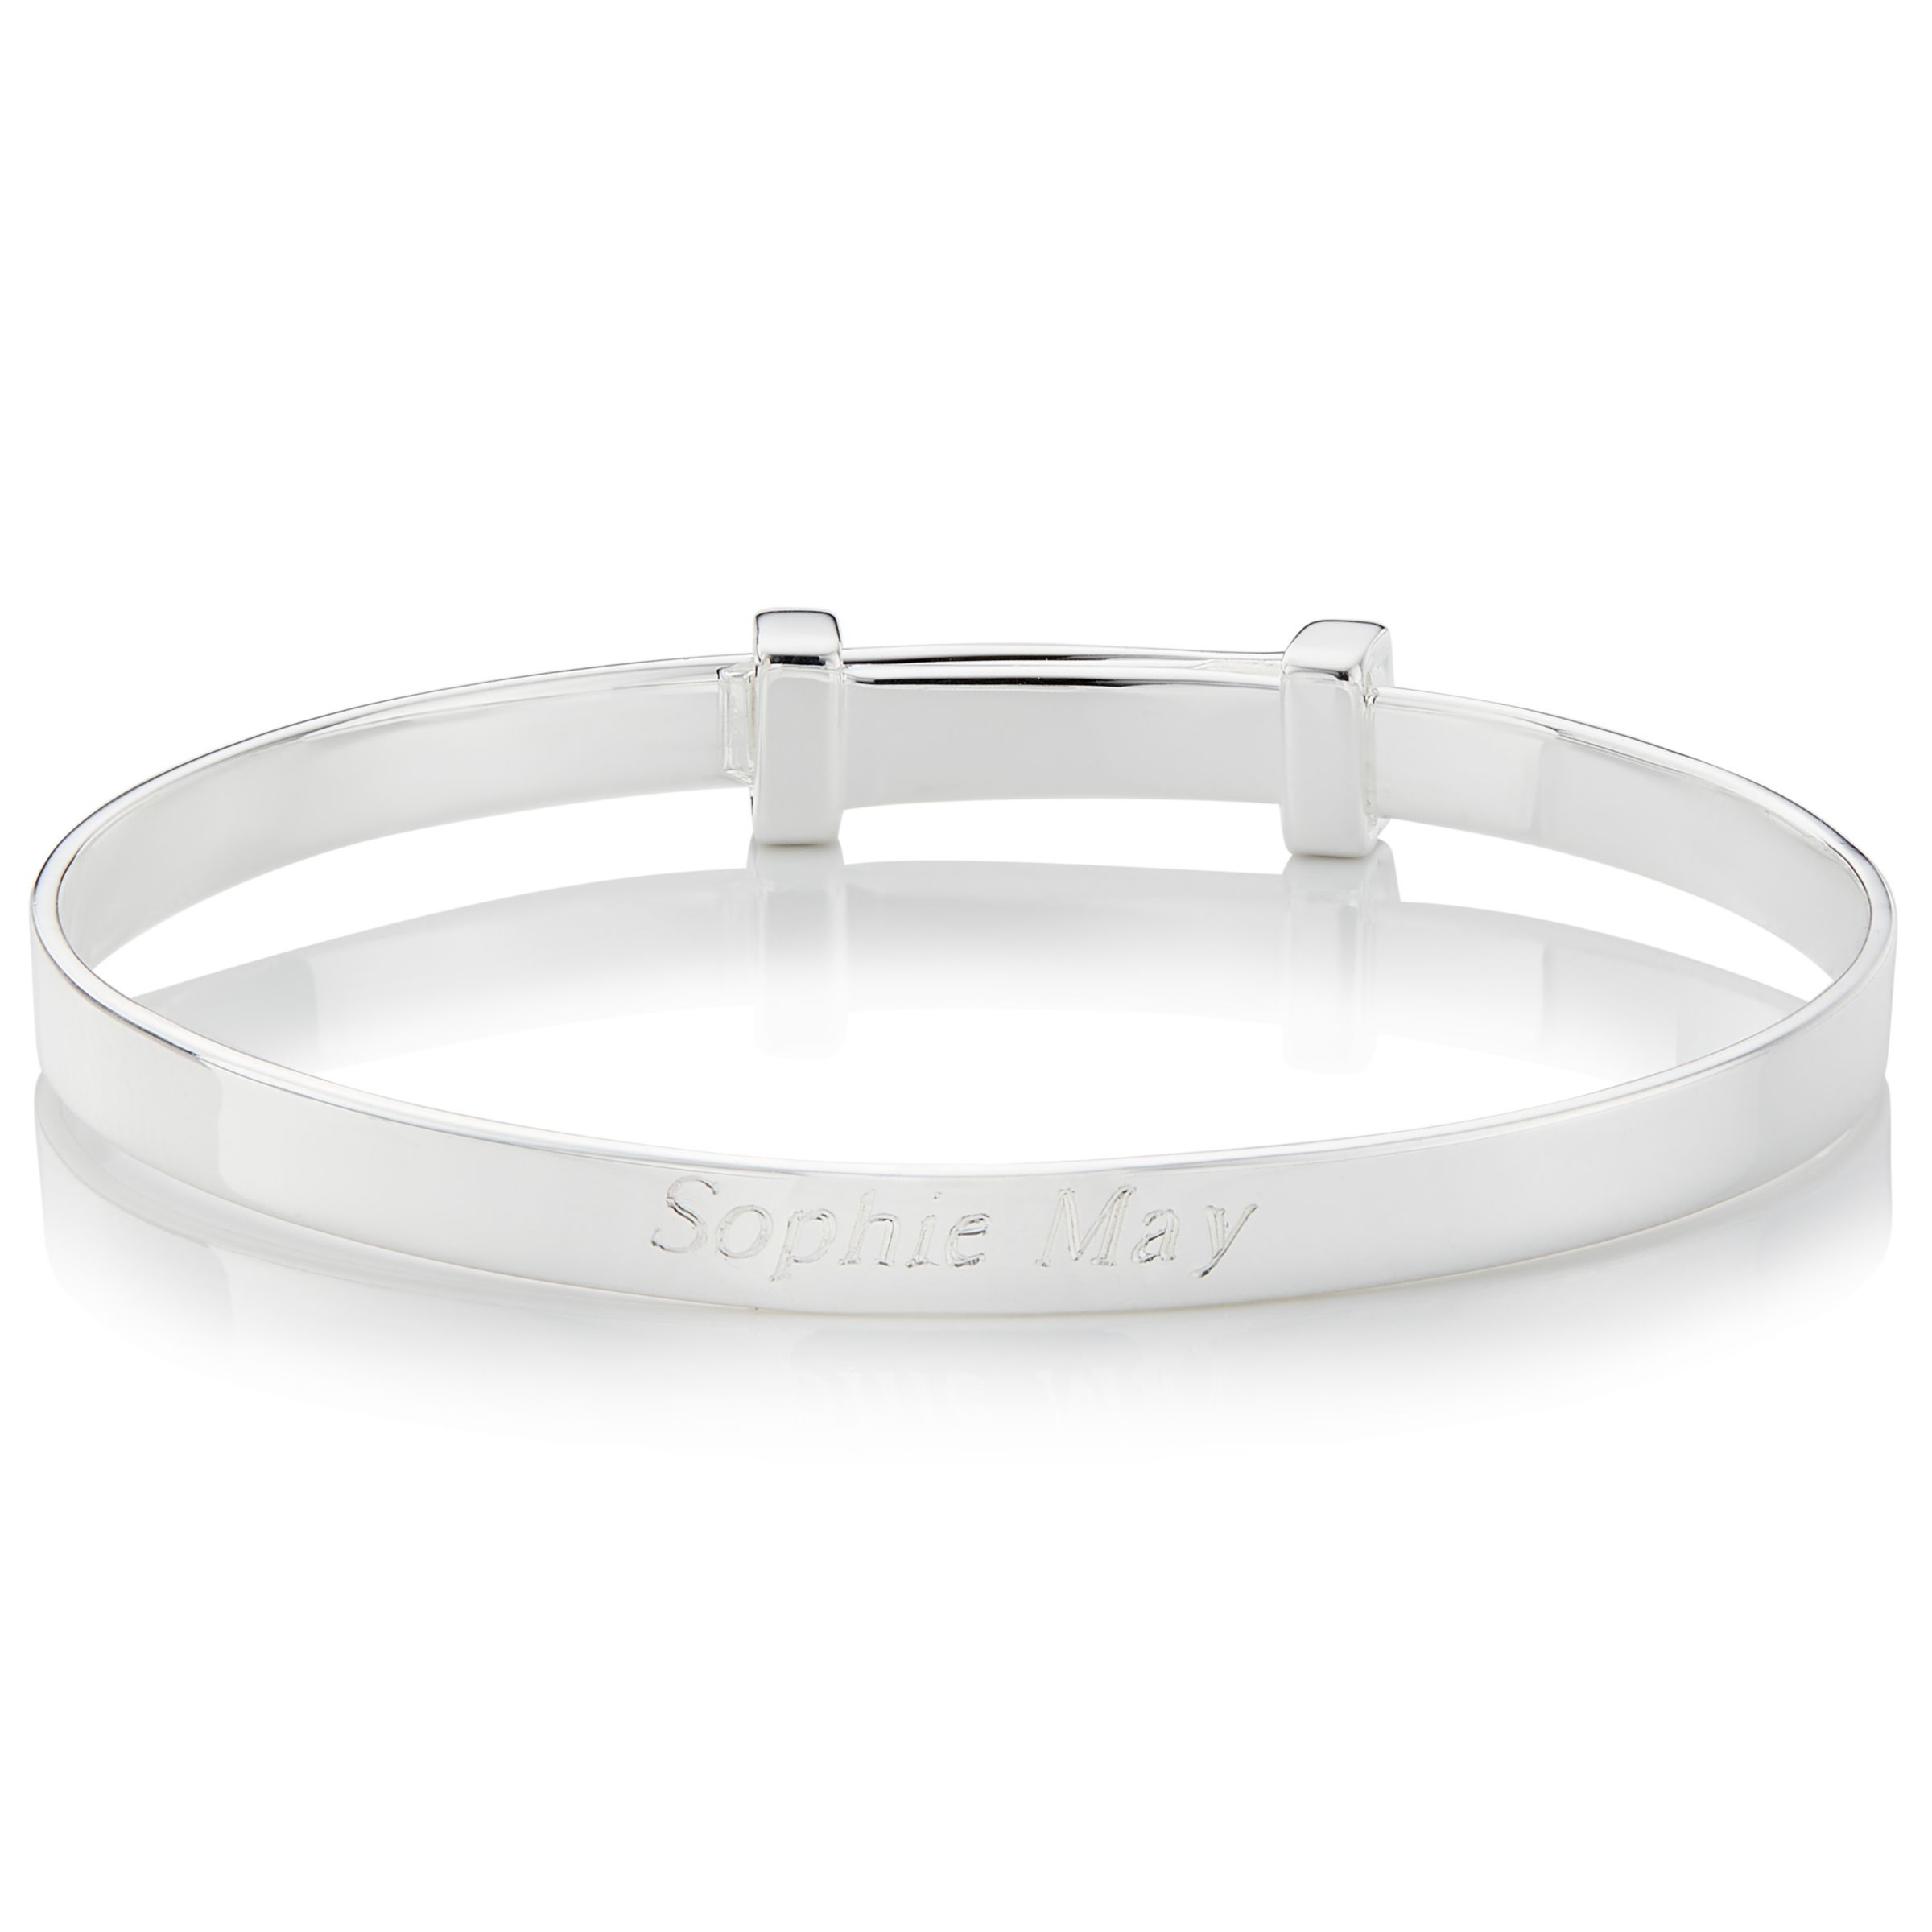 Molly Brown London Sterling Silver Christening Bangle